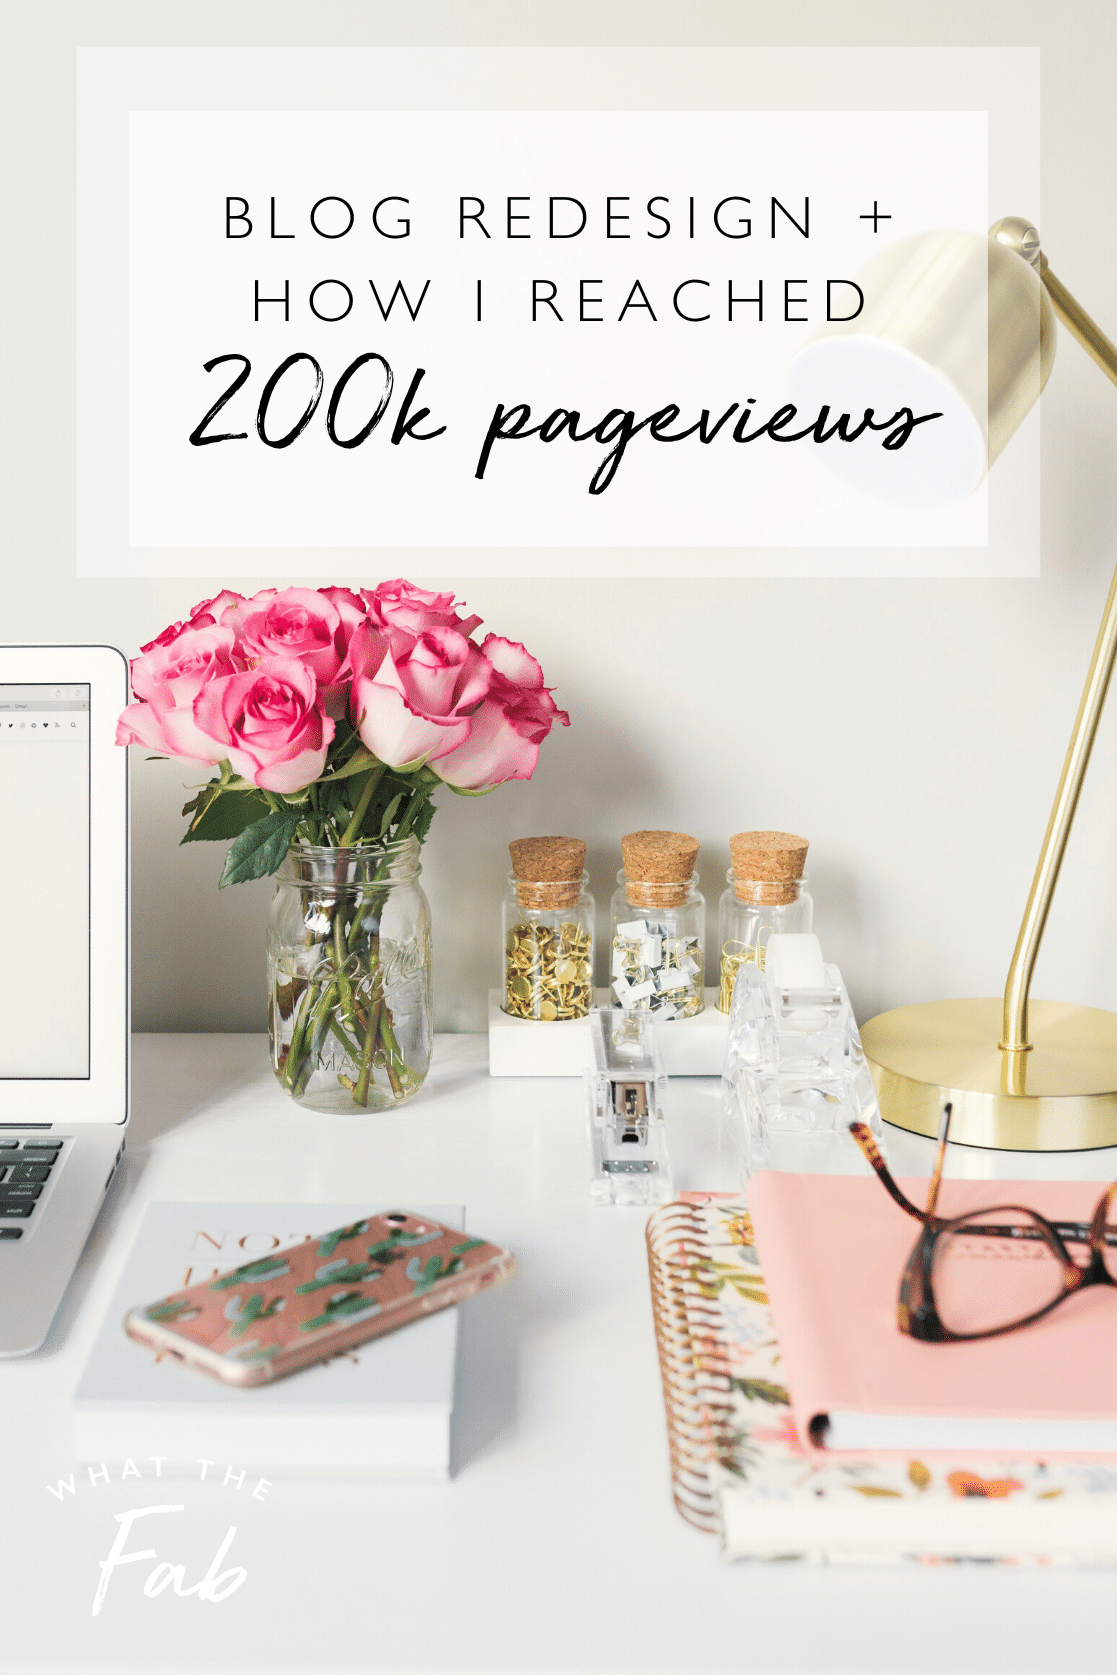 Blog redesign and how I reached 200k website pageviews